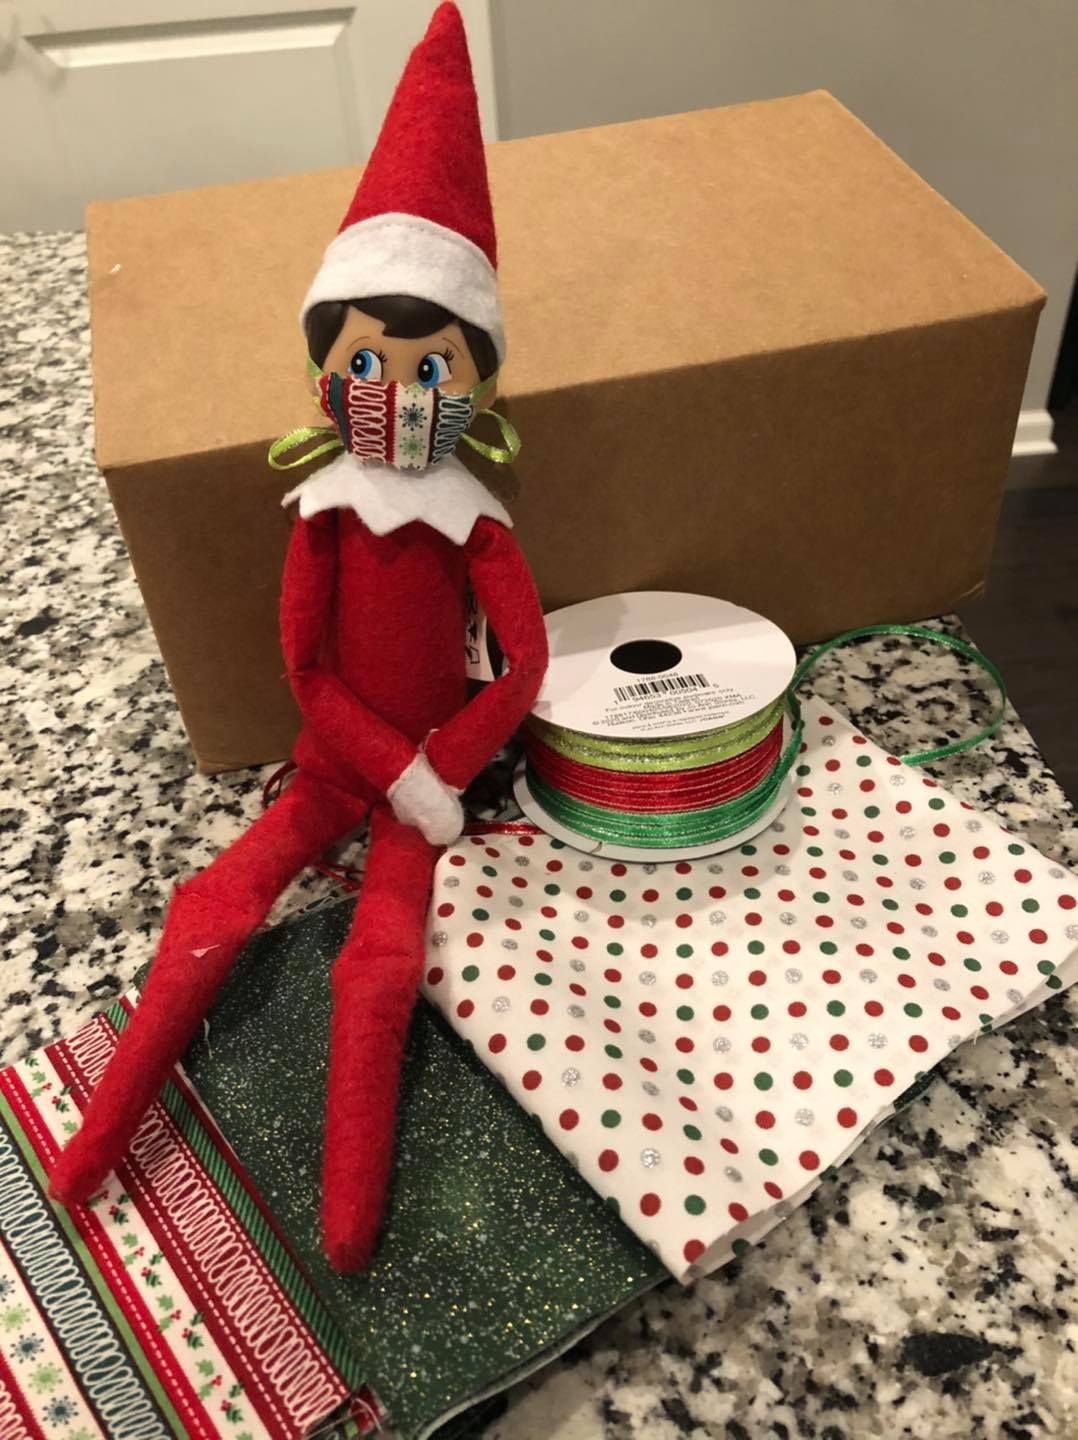 Keep Your Elf On The Shelf Covid 19 Safe This Holiday Season Short Takes On Avon Avon Lake And North Ridgeville Cleveland Com